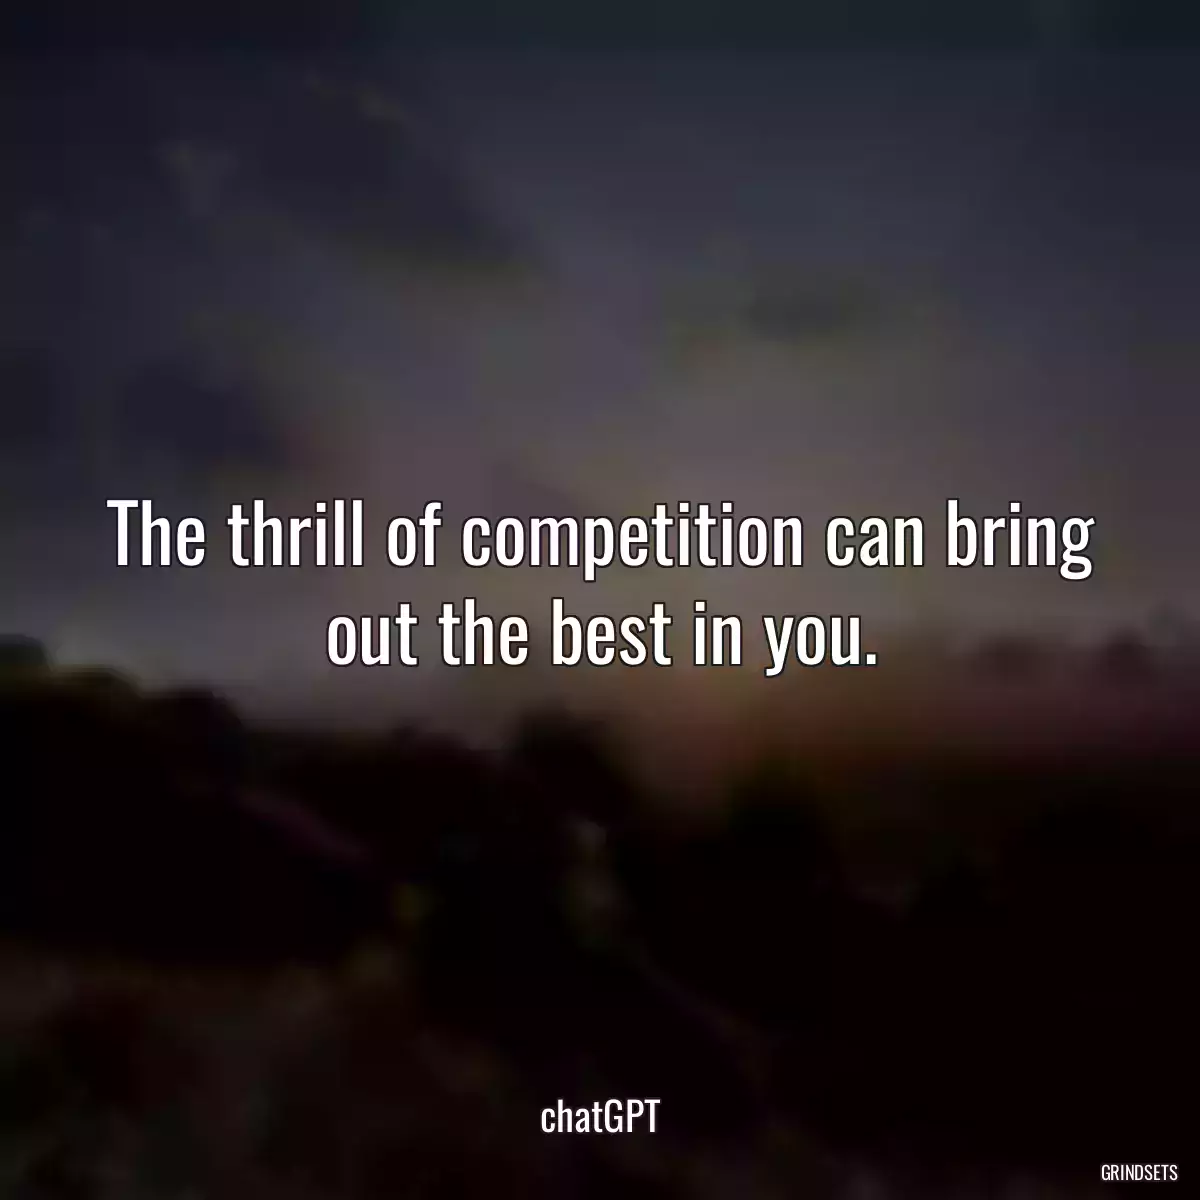 The thrill of competition can bring out the best in you.